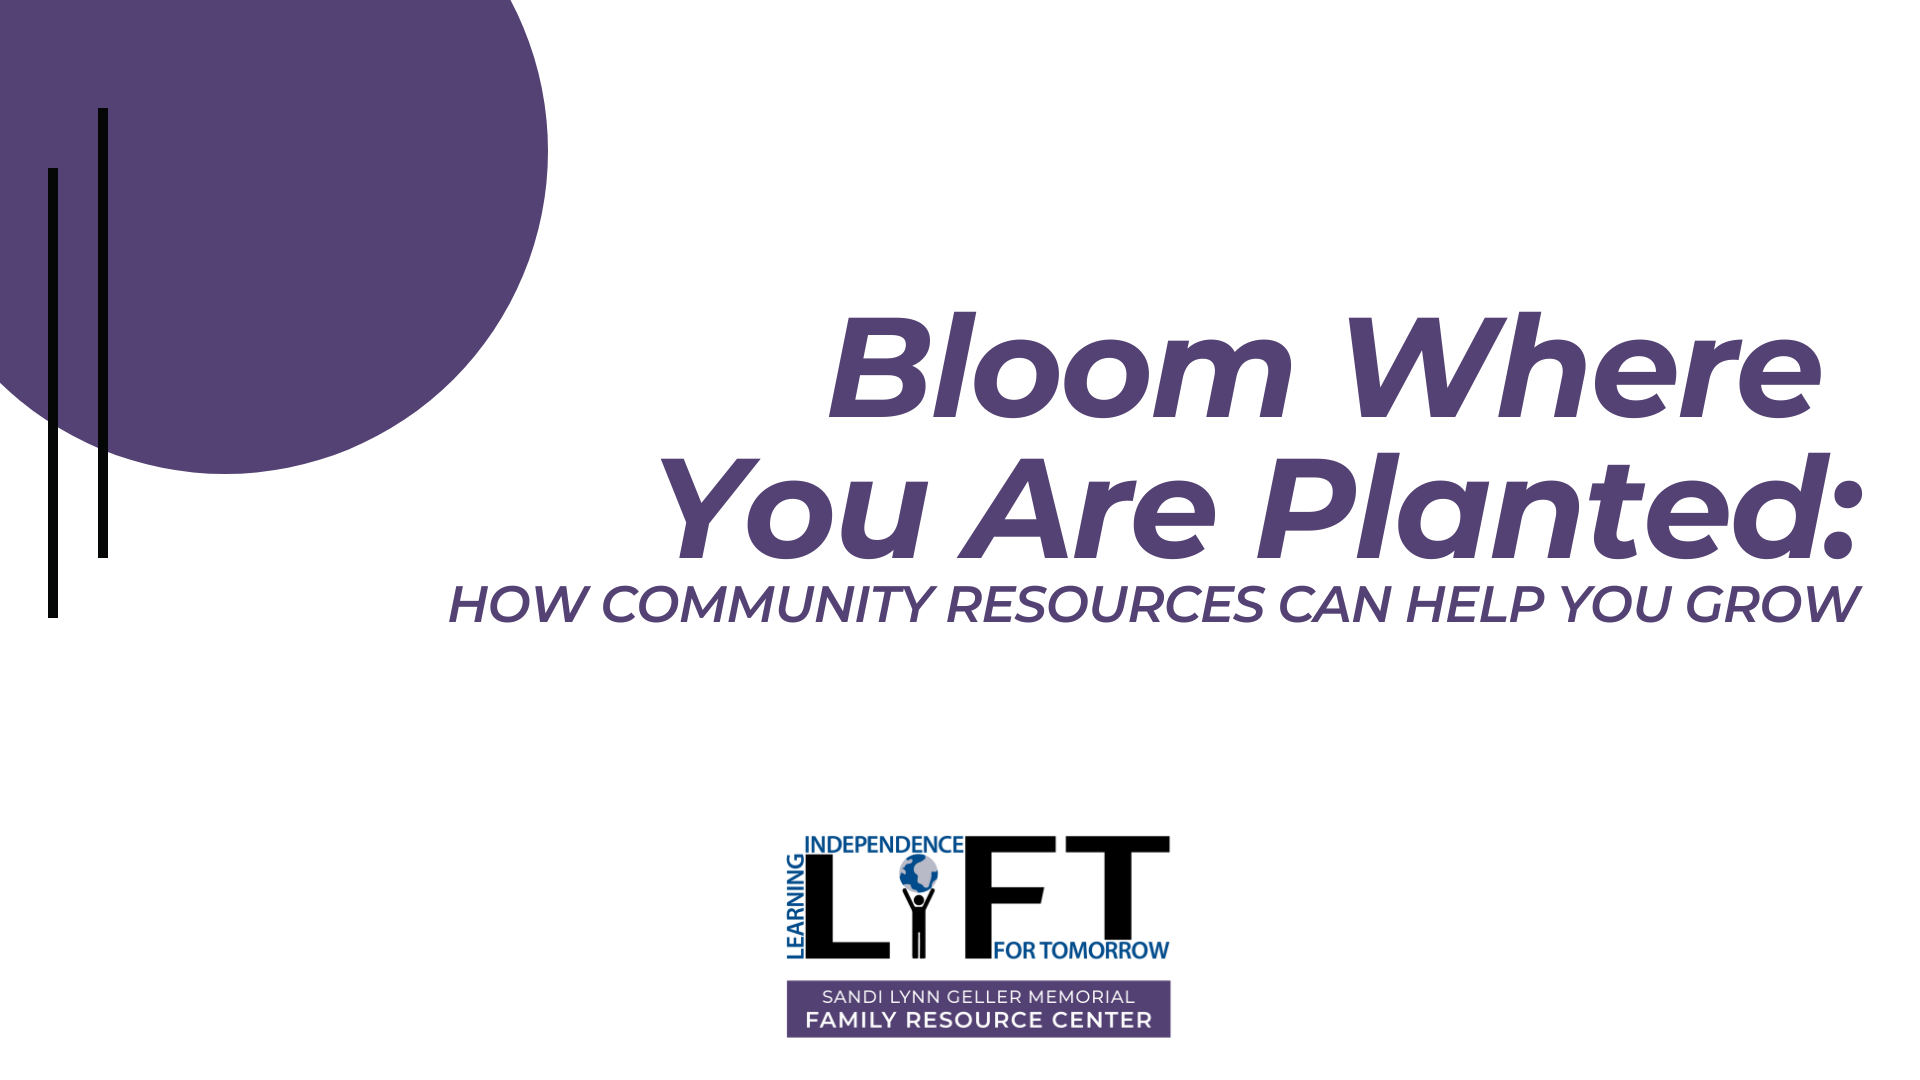 Bloom Where You Are Planted: How Community Resources Can Help You Grow